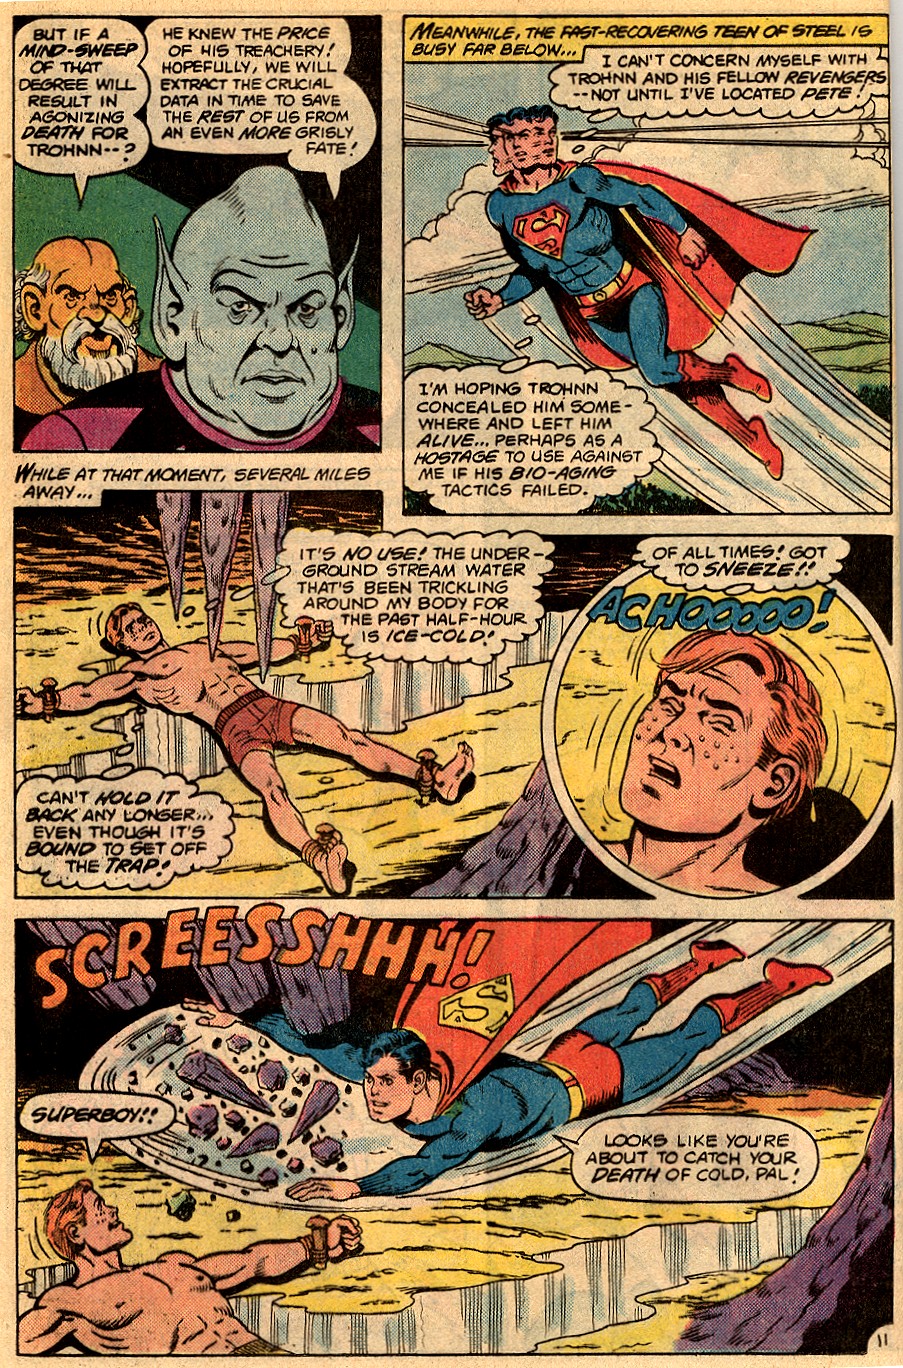 The New Adventures of Superboy 33 Page 15